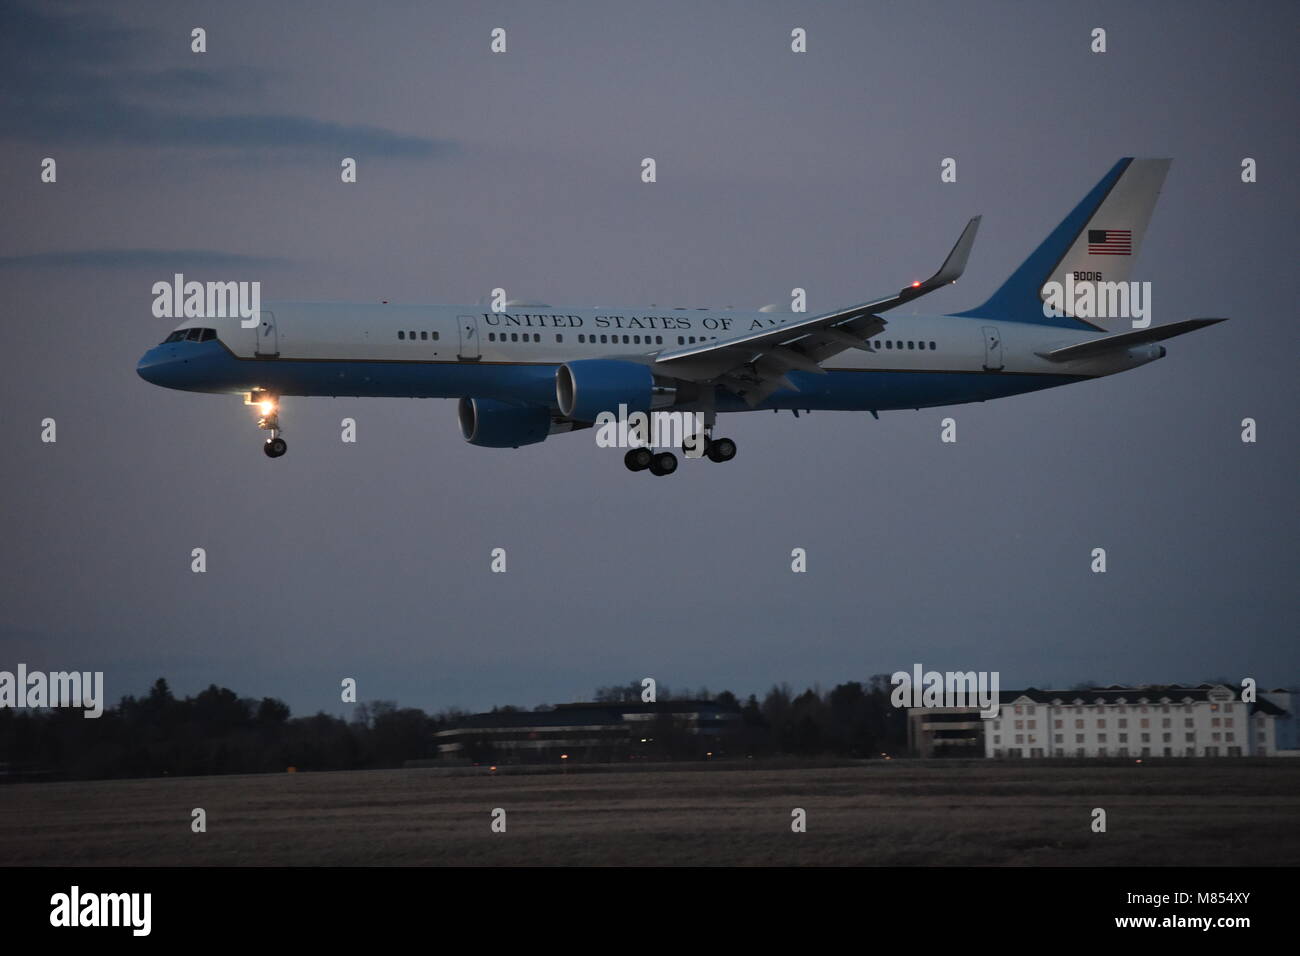 The smaller aircraft in the Air Force One fleet prepares to land at Pittsburgh International Airport as President Trump travels to meet with Rick Saccone representing the 39th Legislative District in the Pennsylvania House of Representatives for a campaign event at Atlantic Aviation March 10, 2018. (U.S. Air National Guard photo by Senior Master Sgt. Shawn Monk) Stock Photo